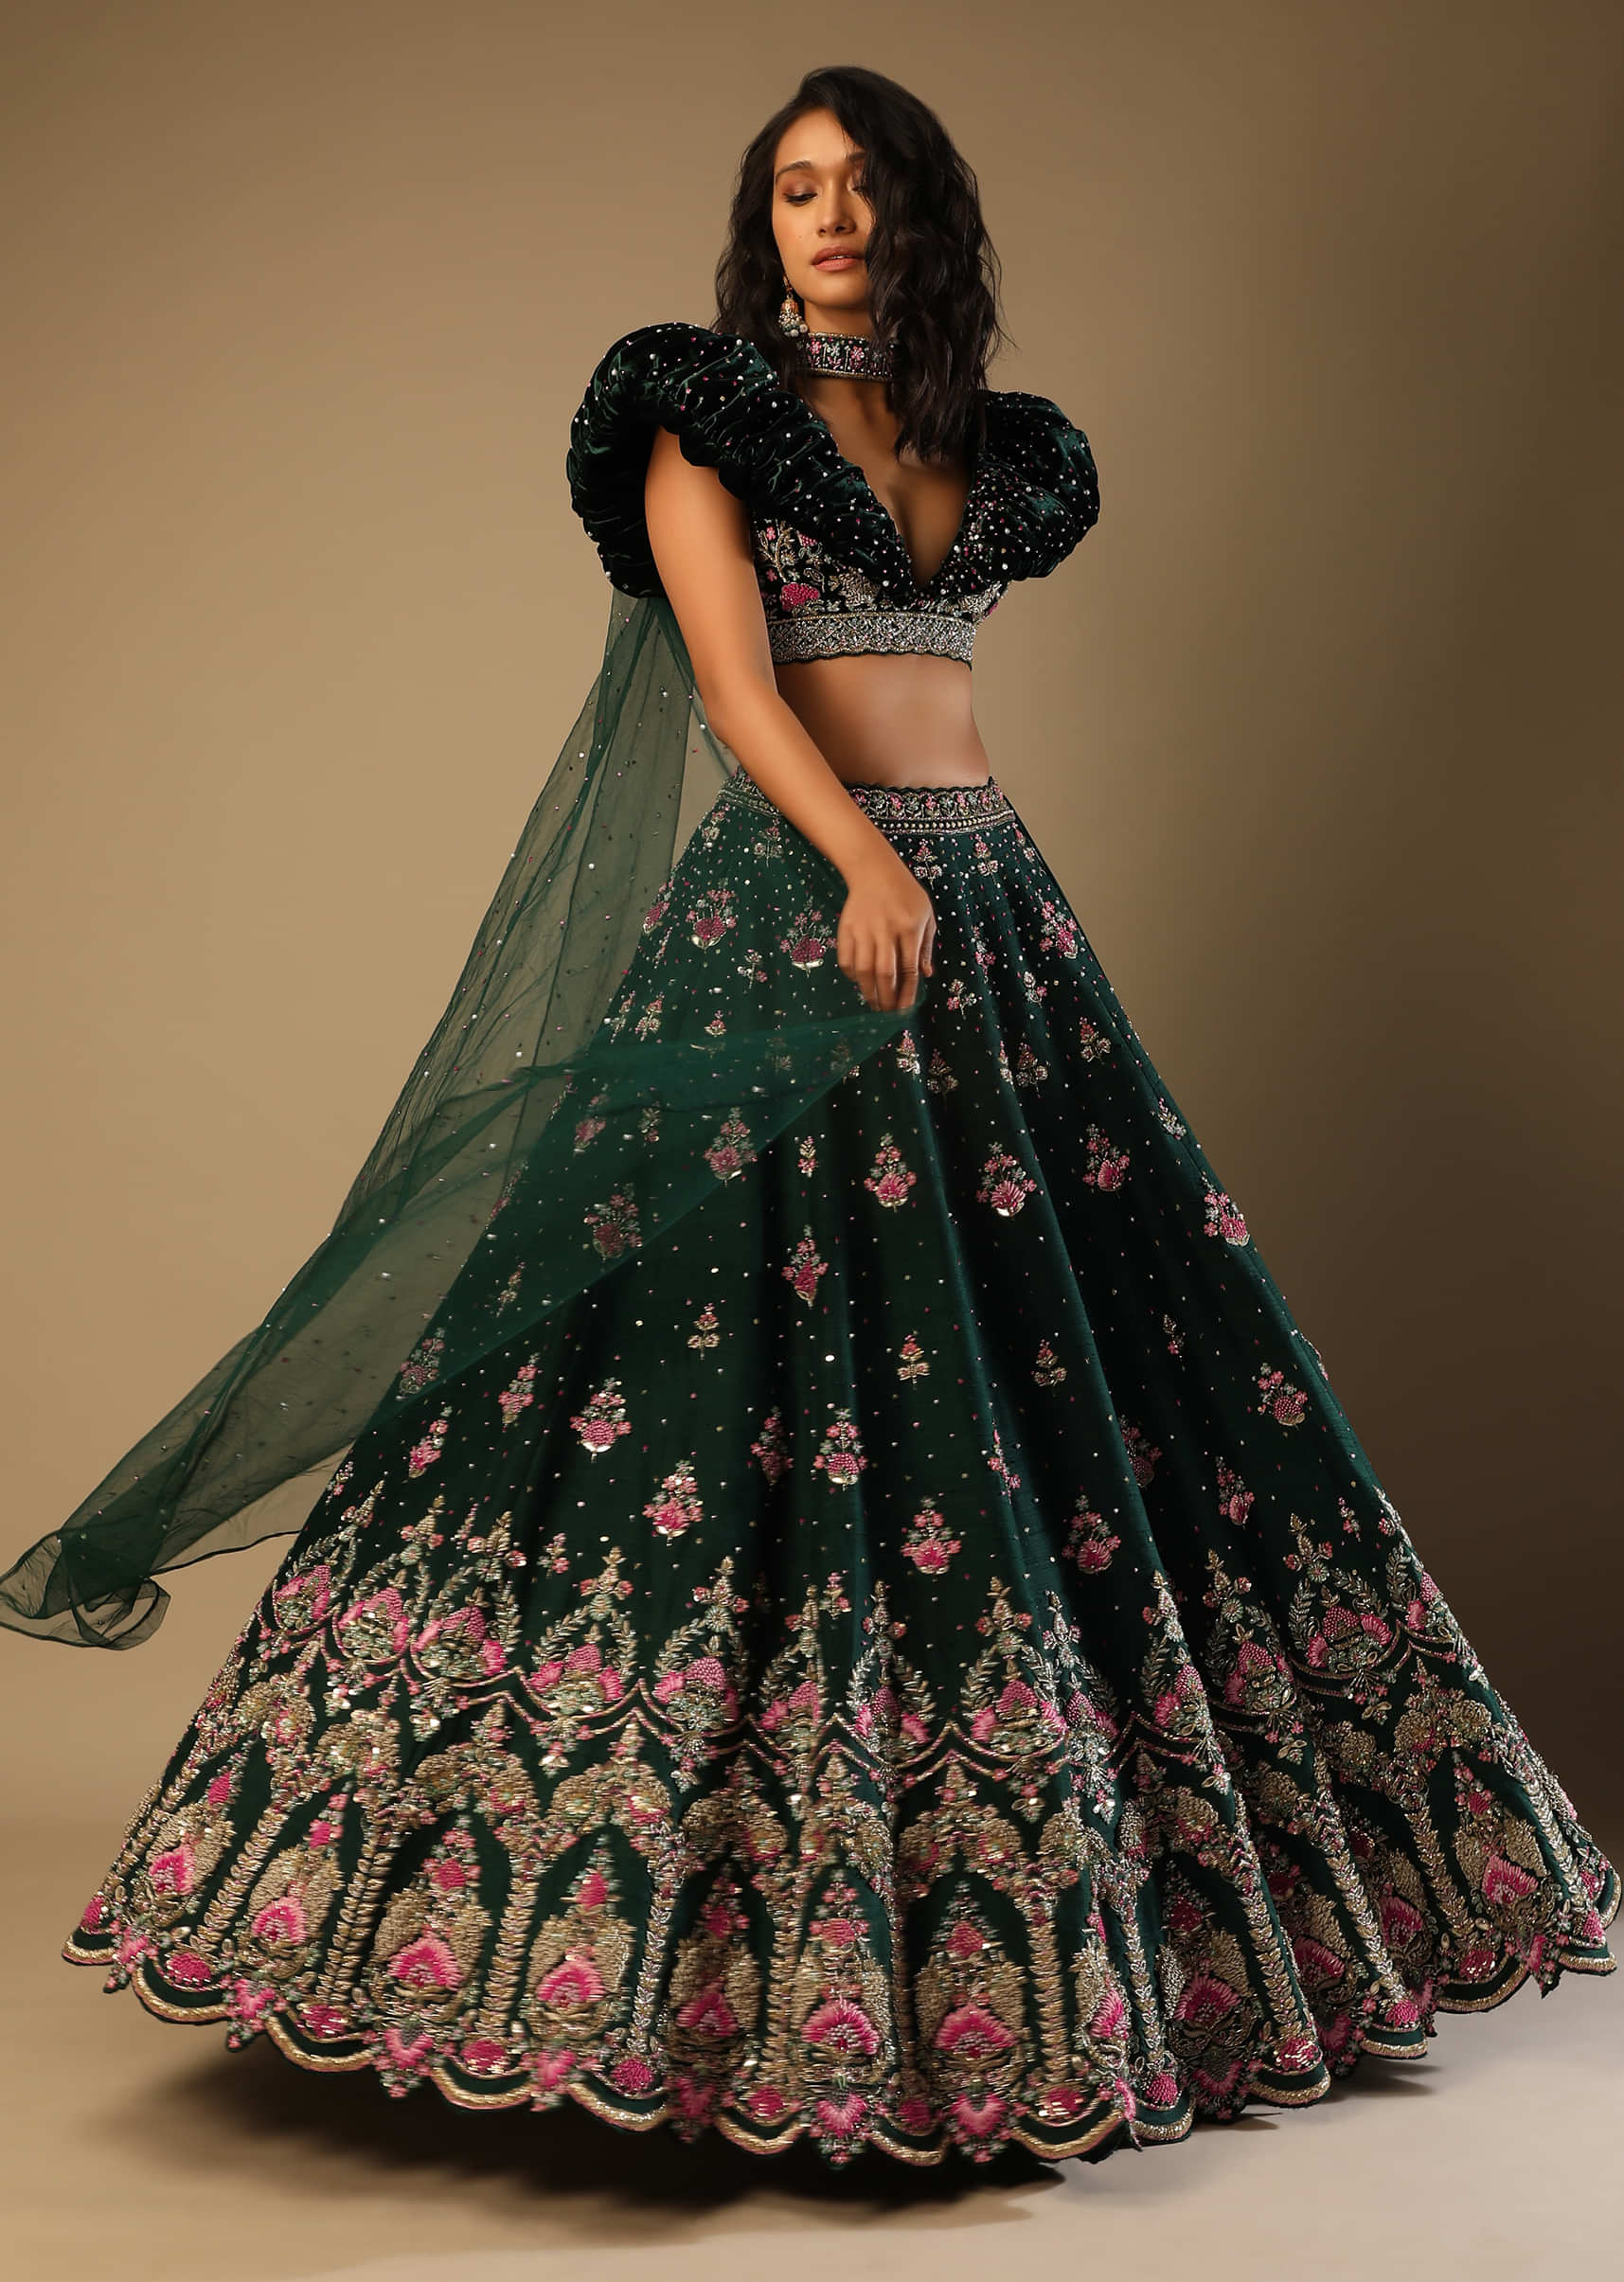 Bottle Green Lehenga And Puff Necked Choli With Multi Colored Hand Embroidered Mughal Motifs 